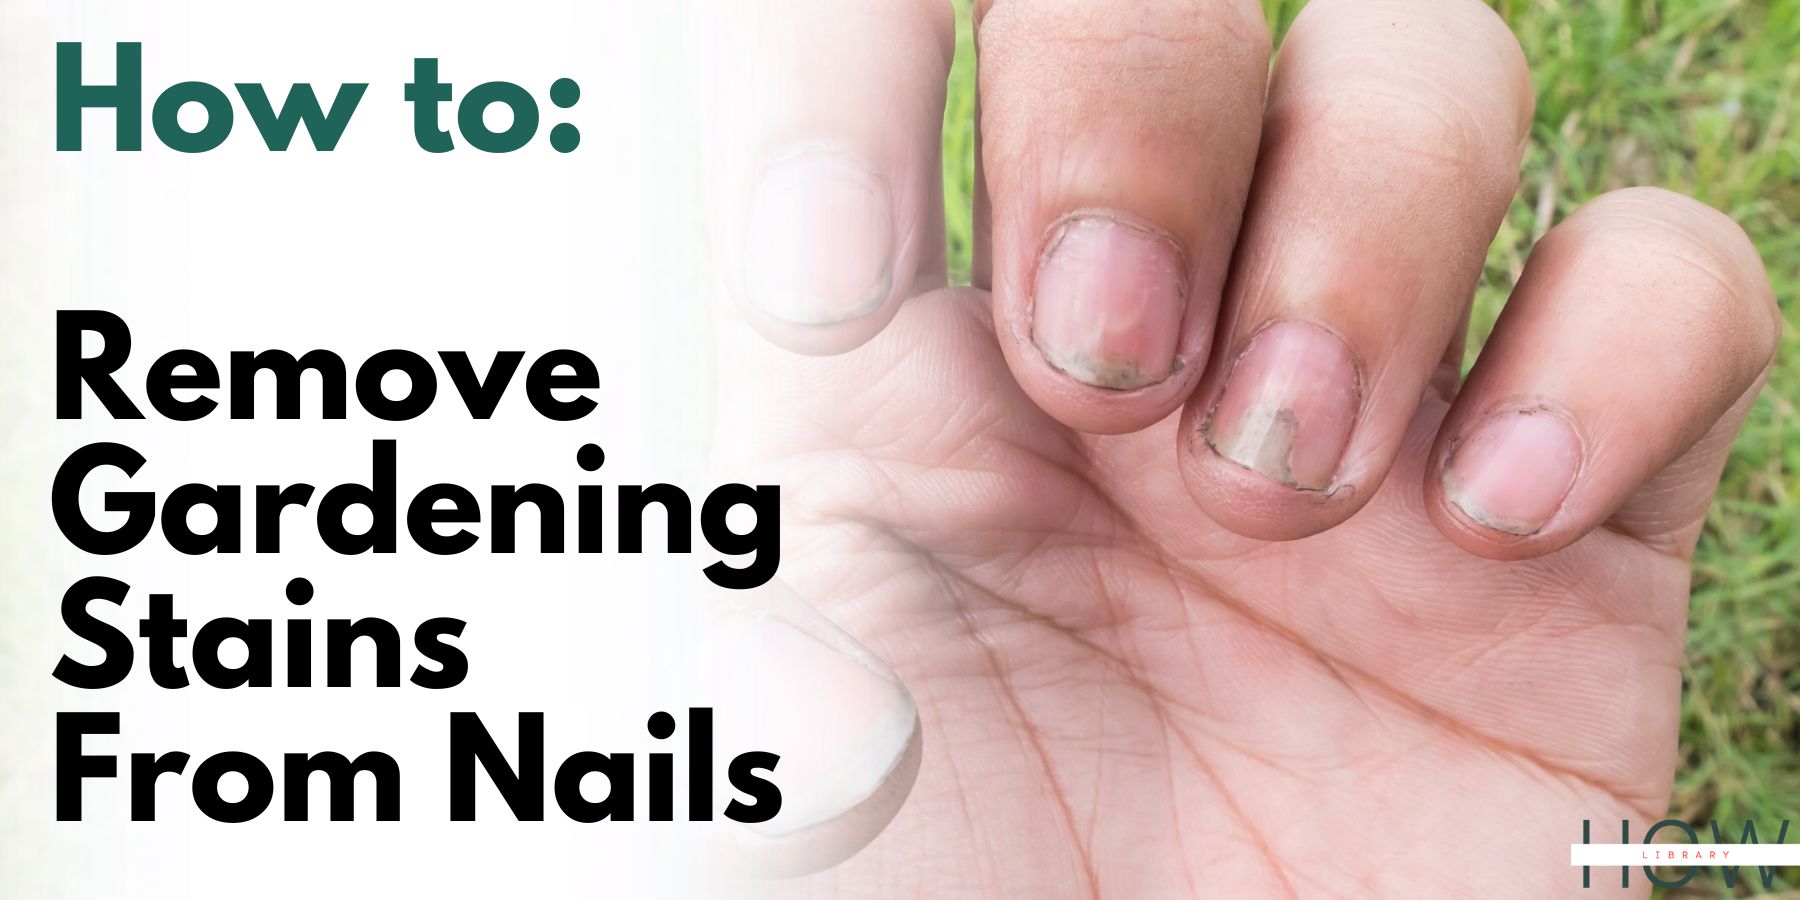 Remove Gardening Stains From Nails